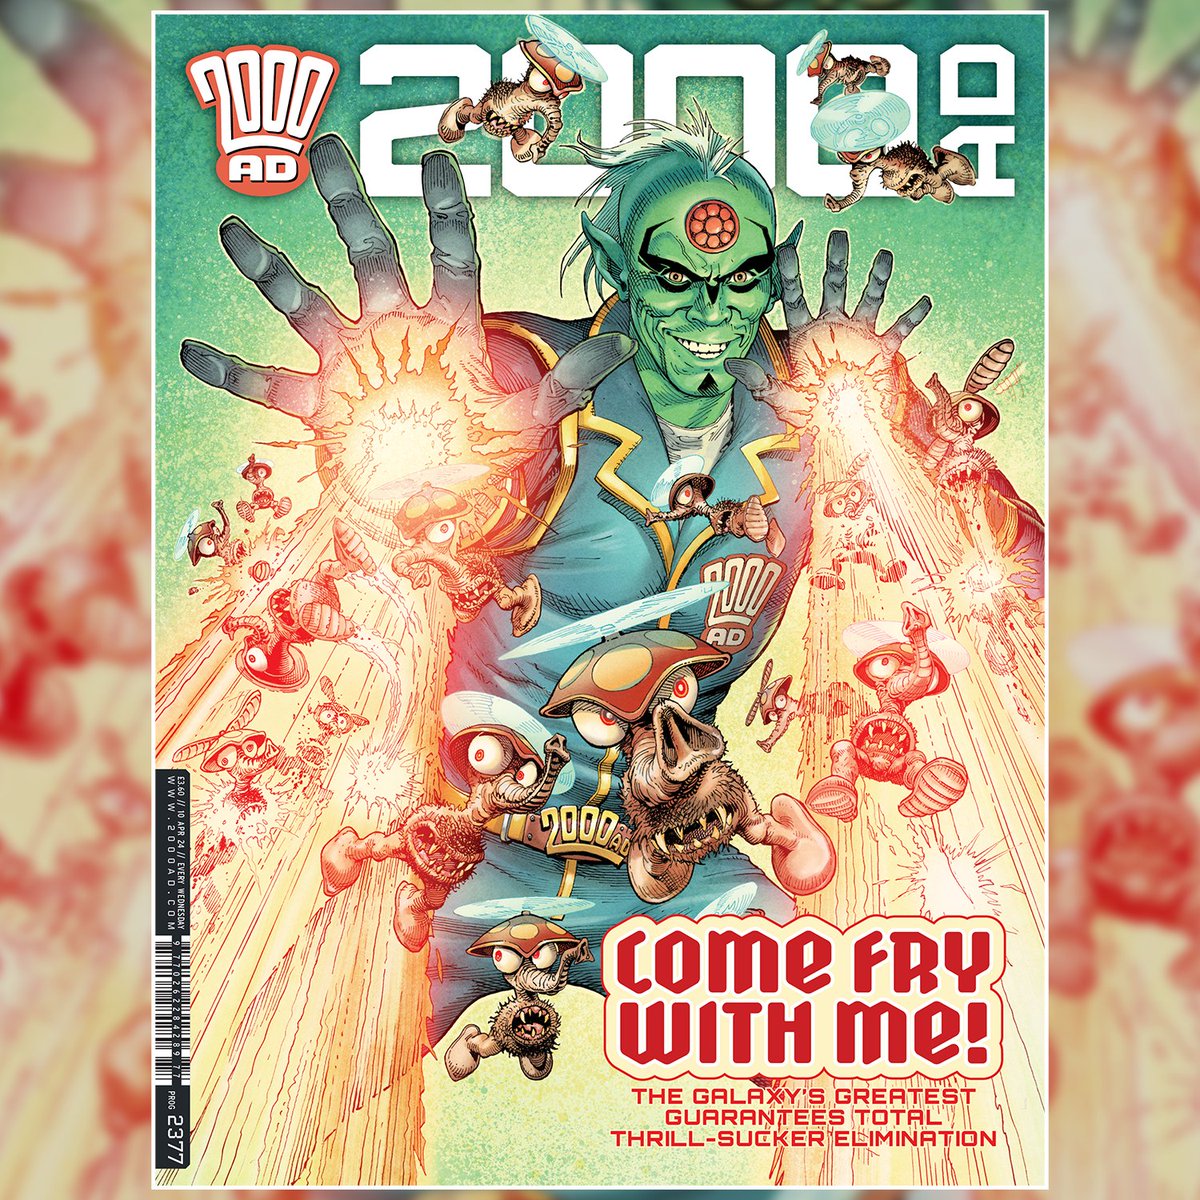 'Oh, it’s a fine time with 2000 AD right now.' @TheComicon take a look through all five stories featured in 2000 AD Prog 2377, out now! bit.ly/3vSirj1